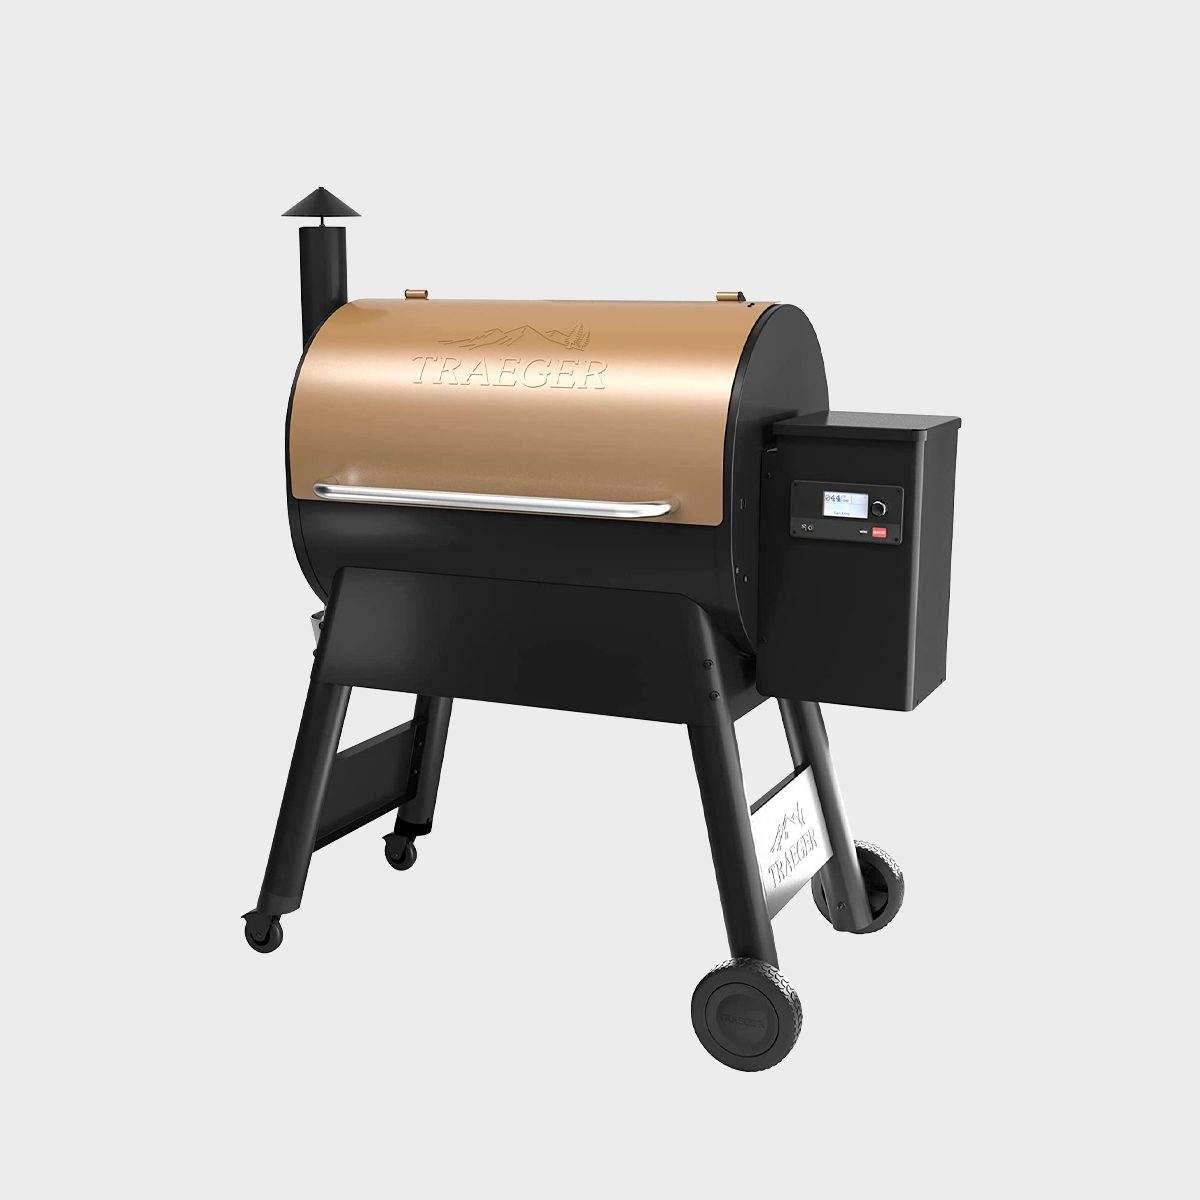 Traeger Grills Pro Series 780 Wood Pellet Grill And Smoker With Alexa And Wifire Smart Home Technology